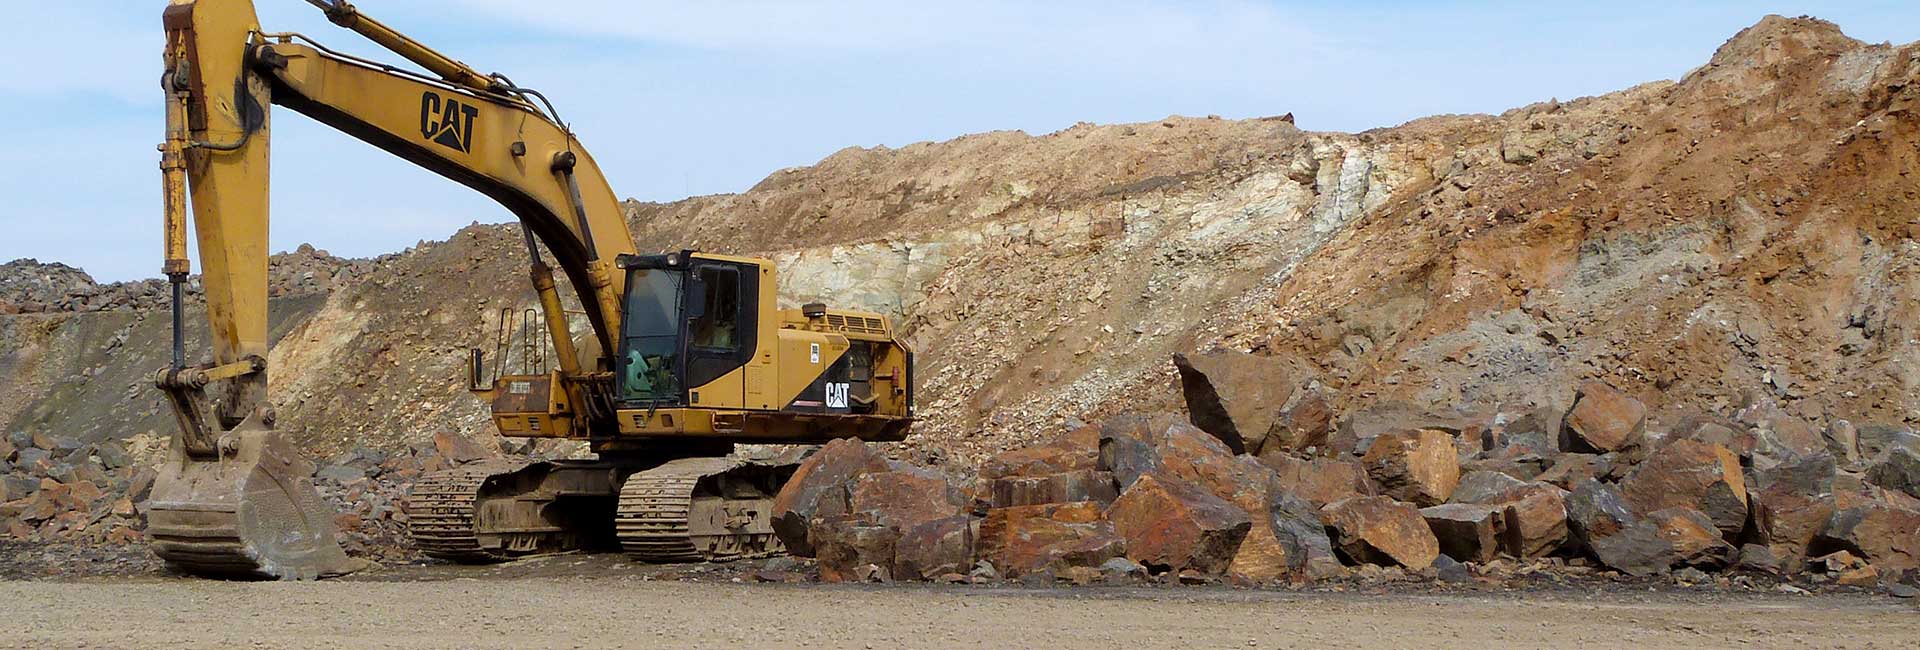 Ecavation, snow removal in Maine, Mooring Stones, Road Construction, Raw Materials